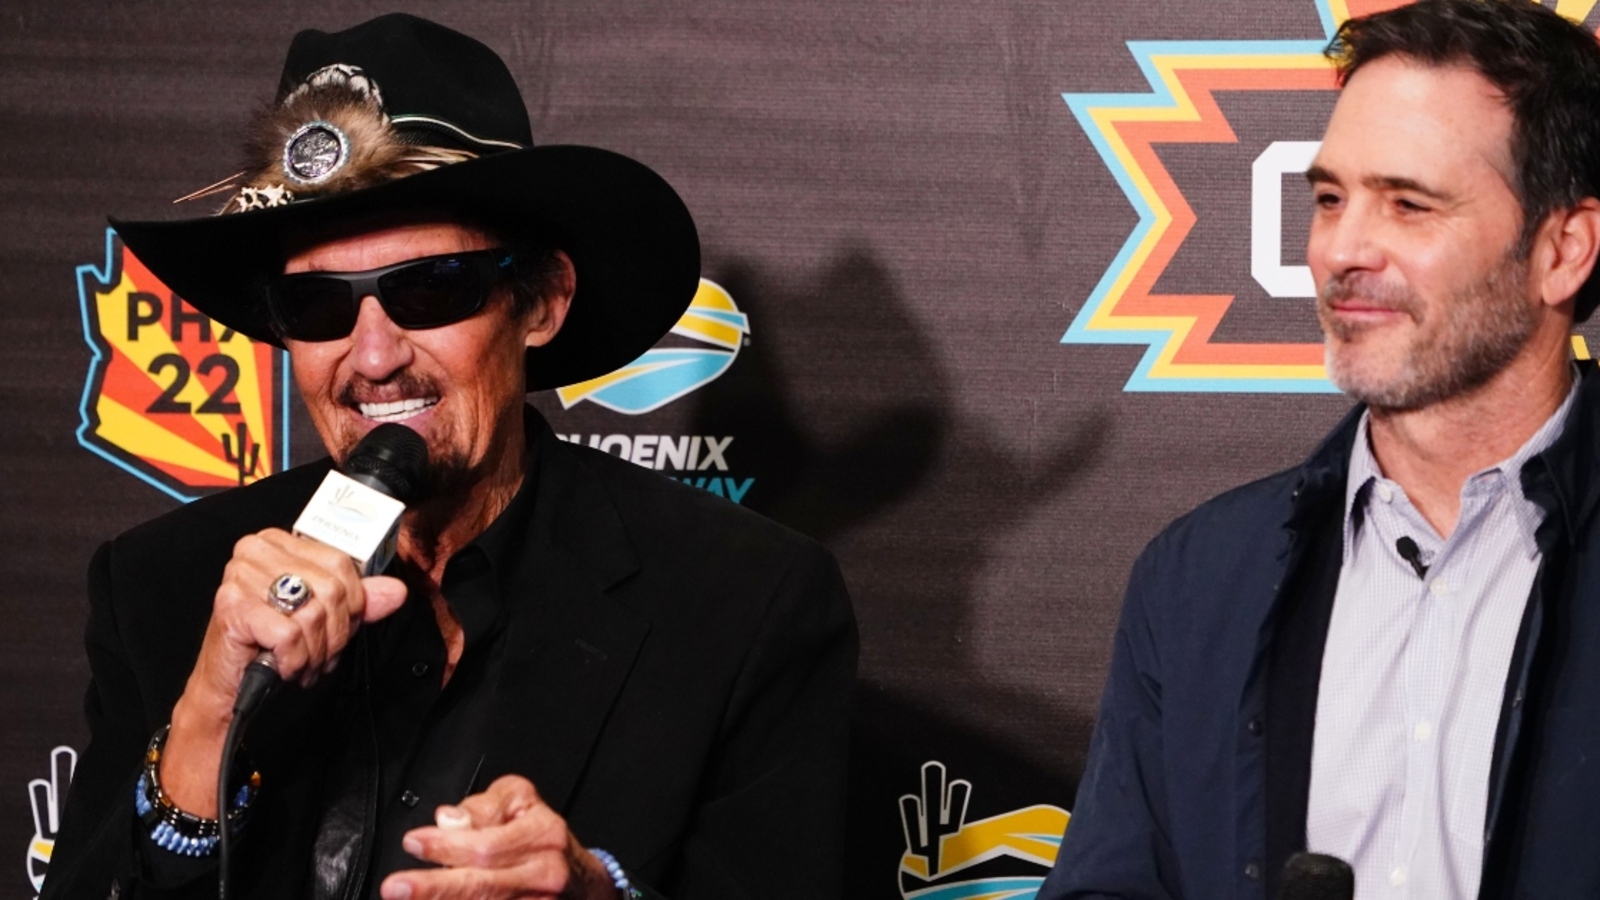 Richard Petty, Jimmie Johnson to make appearances at Dover to celebrate Petty Family’s 75th anniversary in NASCAR